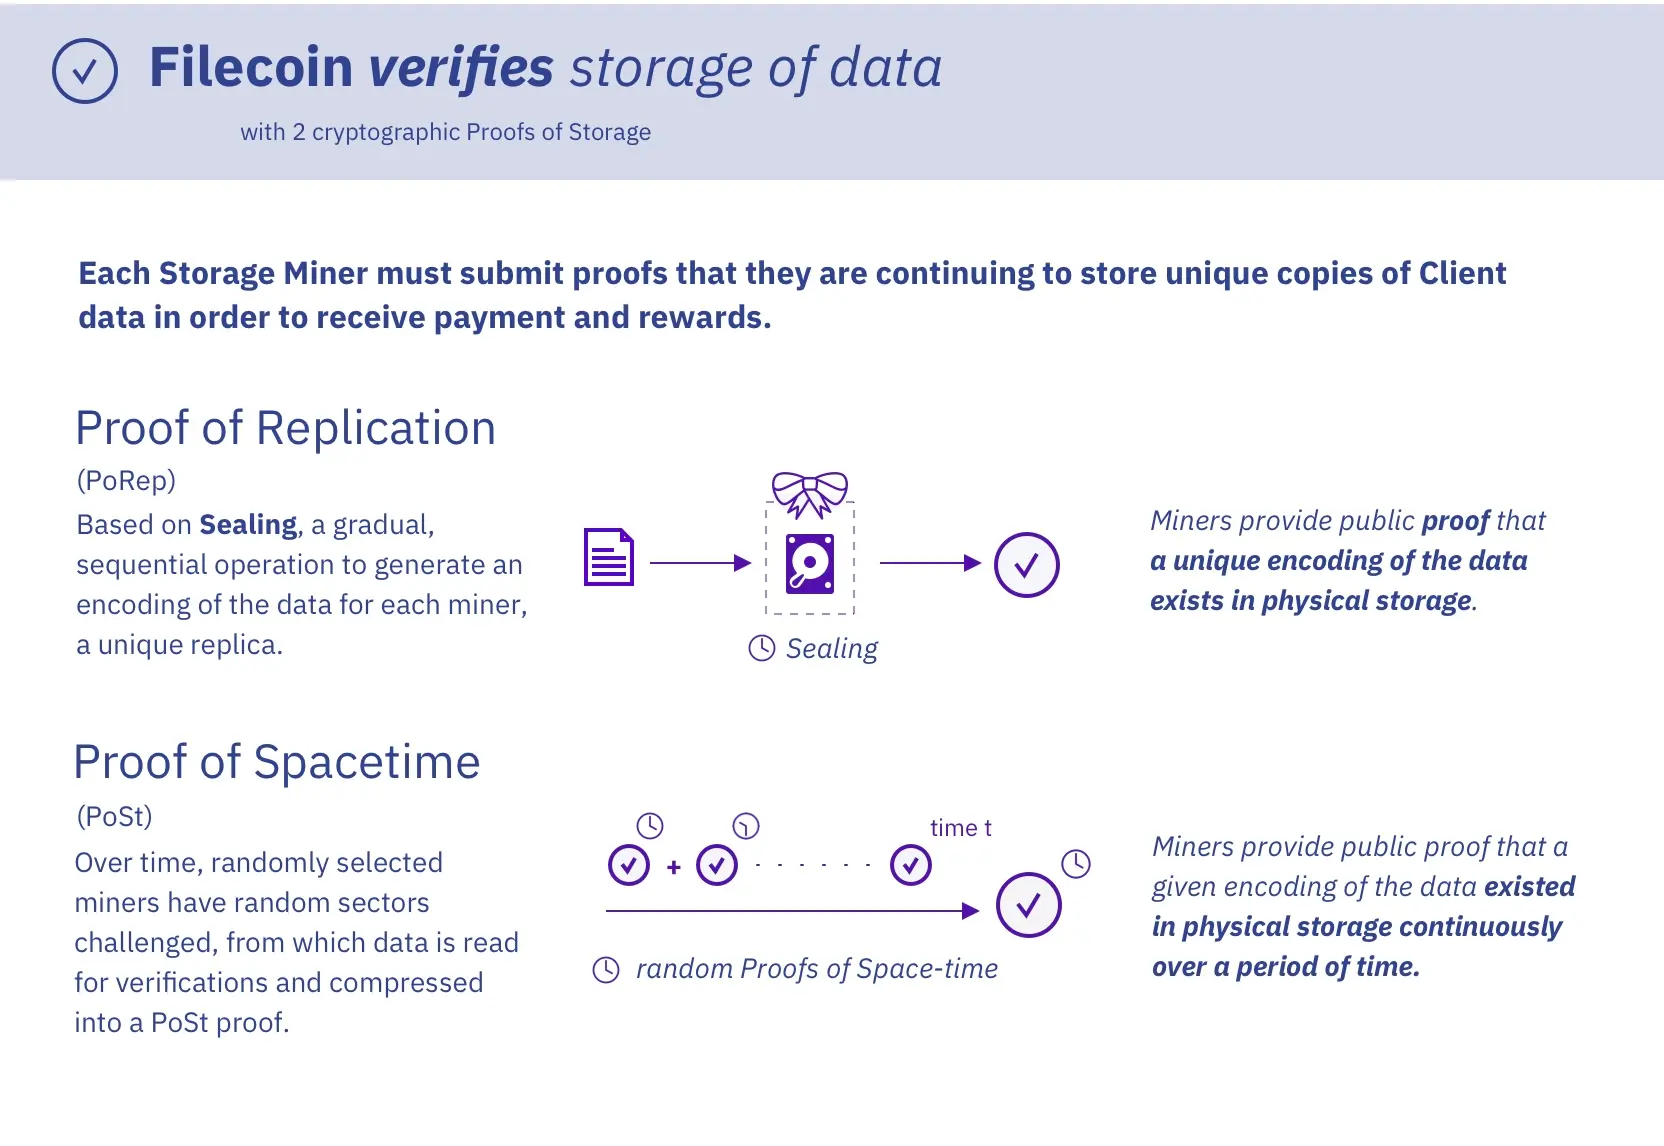 Filecoins Proof of Replication & Proof of Spacetime